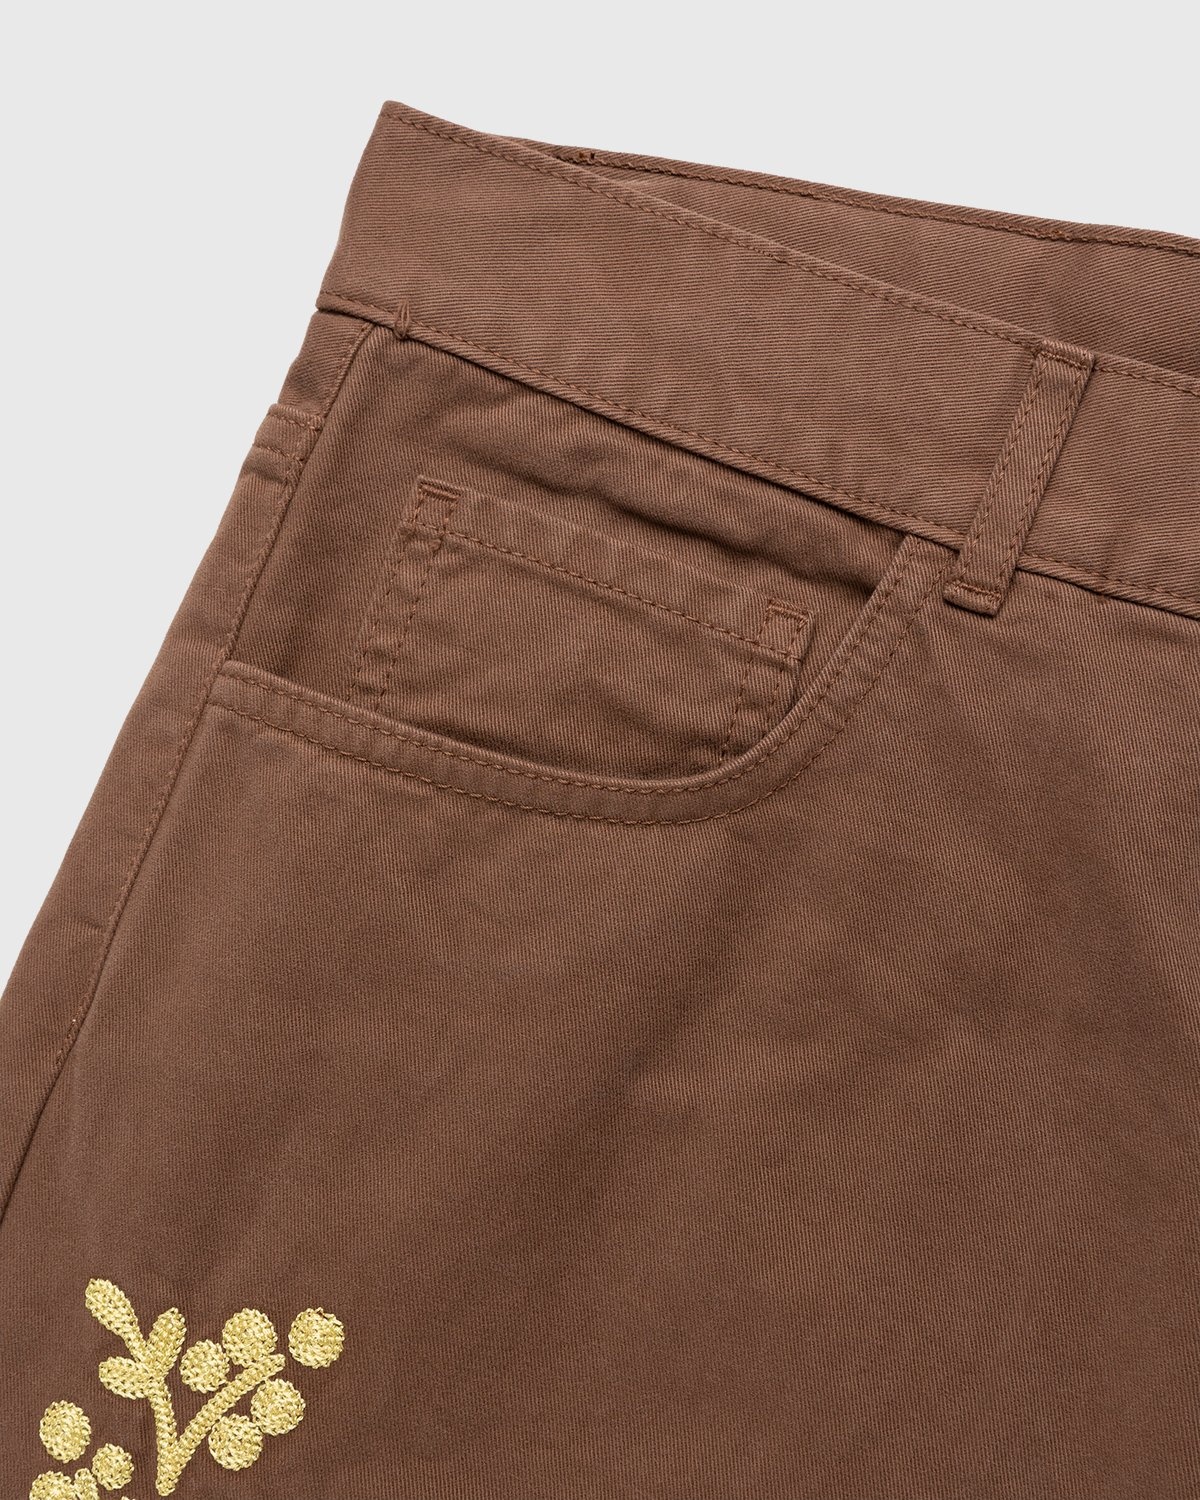 Carne Bollente – The Back Bump Trouser Brown - Pants - Brown - Image 8